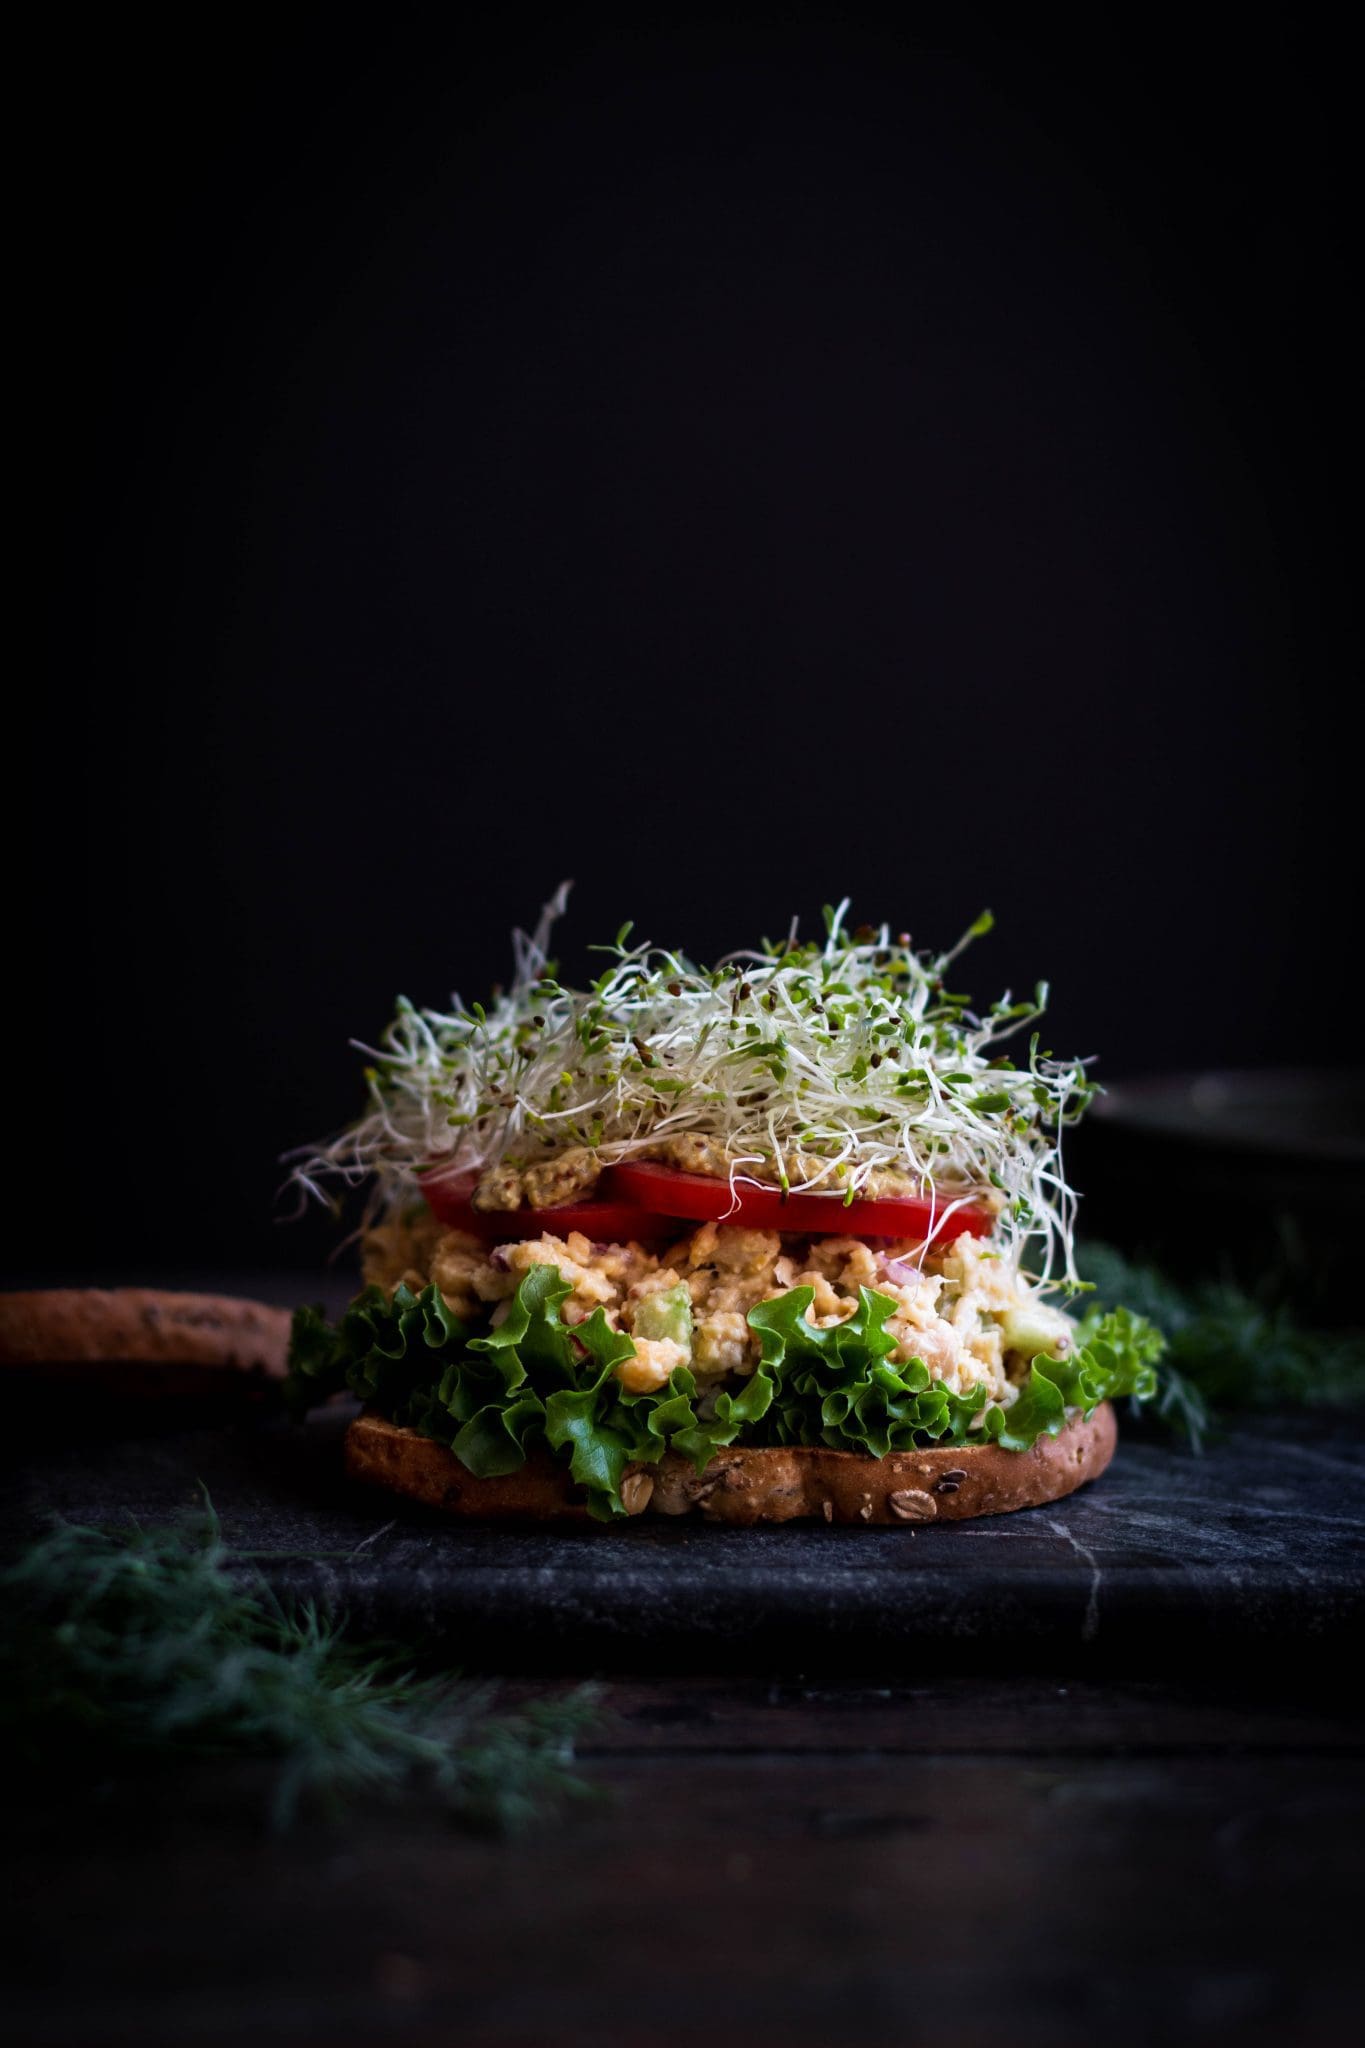 opened chickpea salad sandwich seen from the side